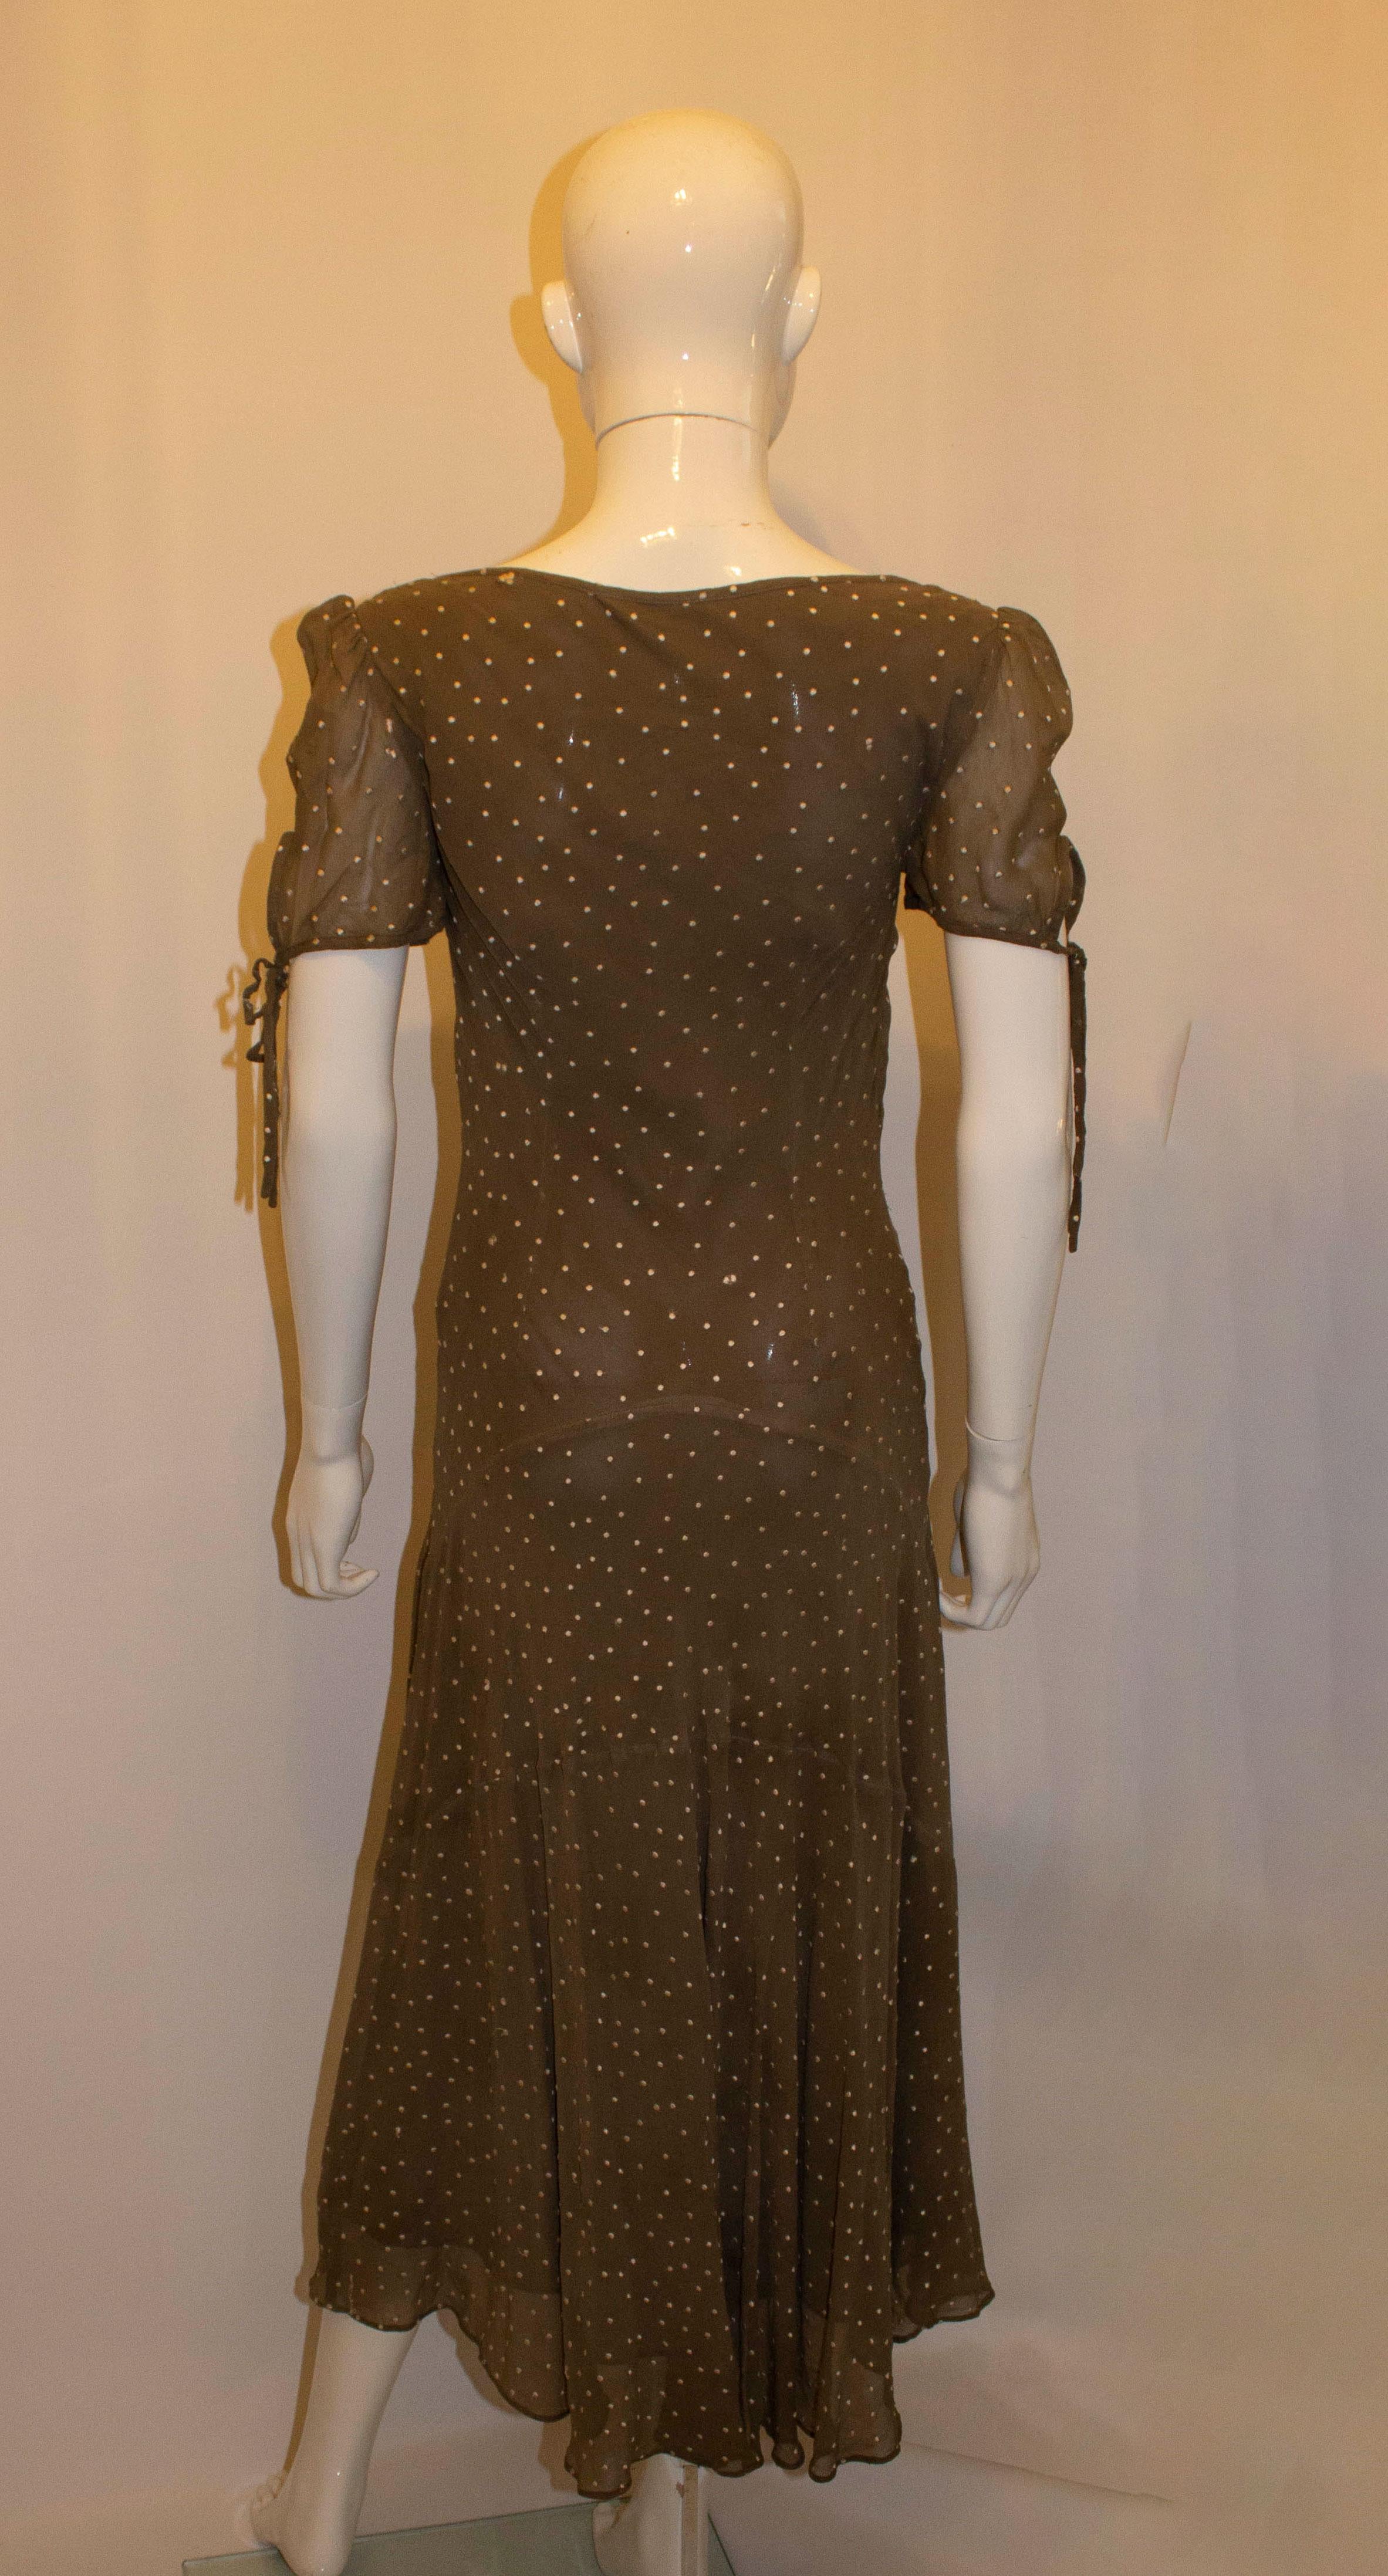 Laura Ashley Spotted Silk Tea Dress In Good Condition For Sale In London, GB